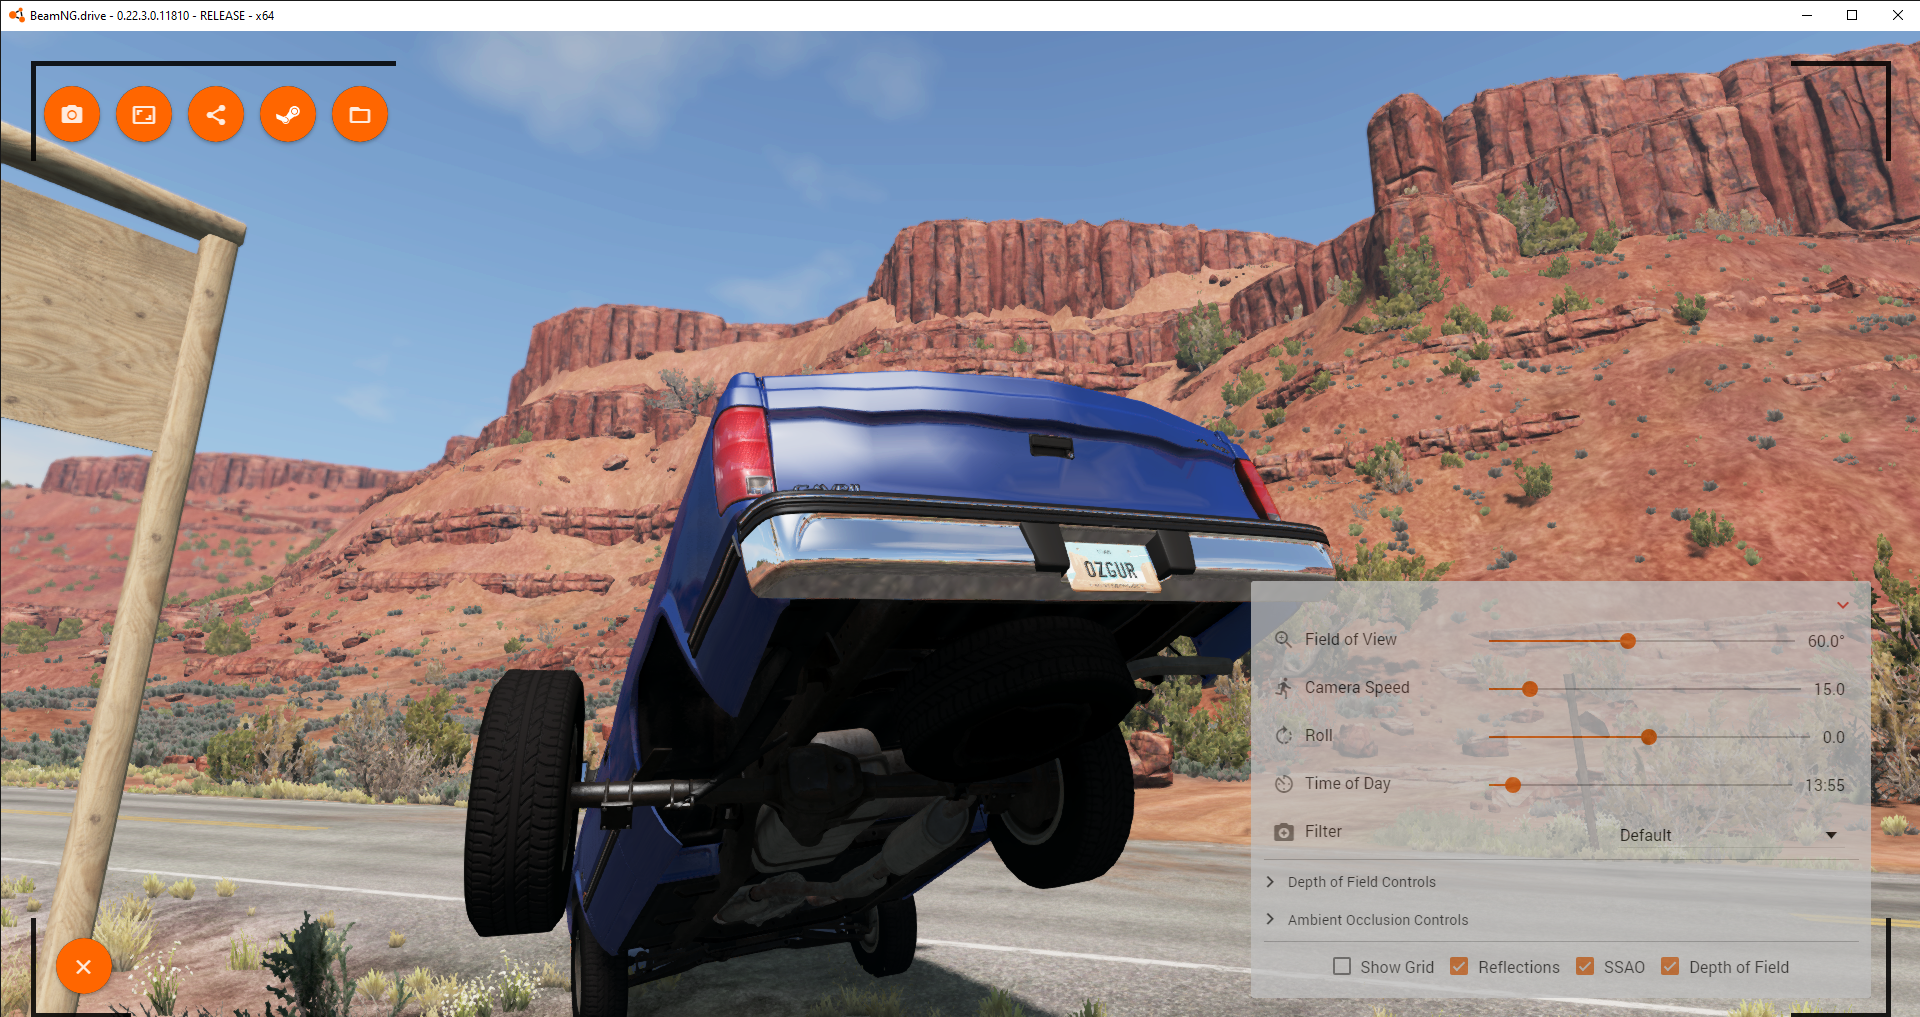 BeamNG.drive - 0.22.3.0.11810 - RELEASE - x64 21.05.2021 00_35_28.png